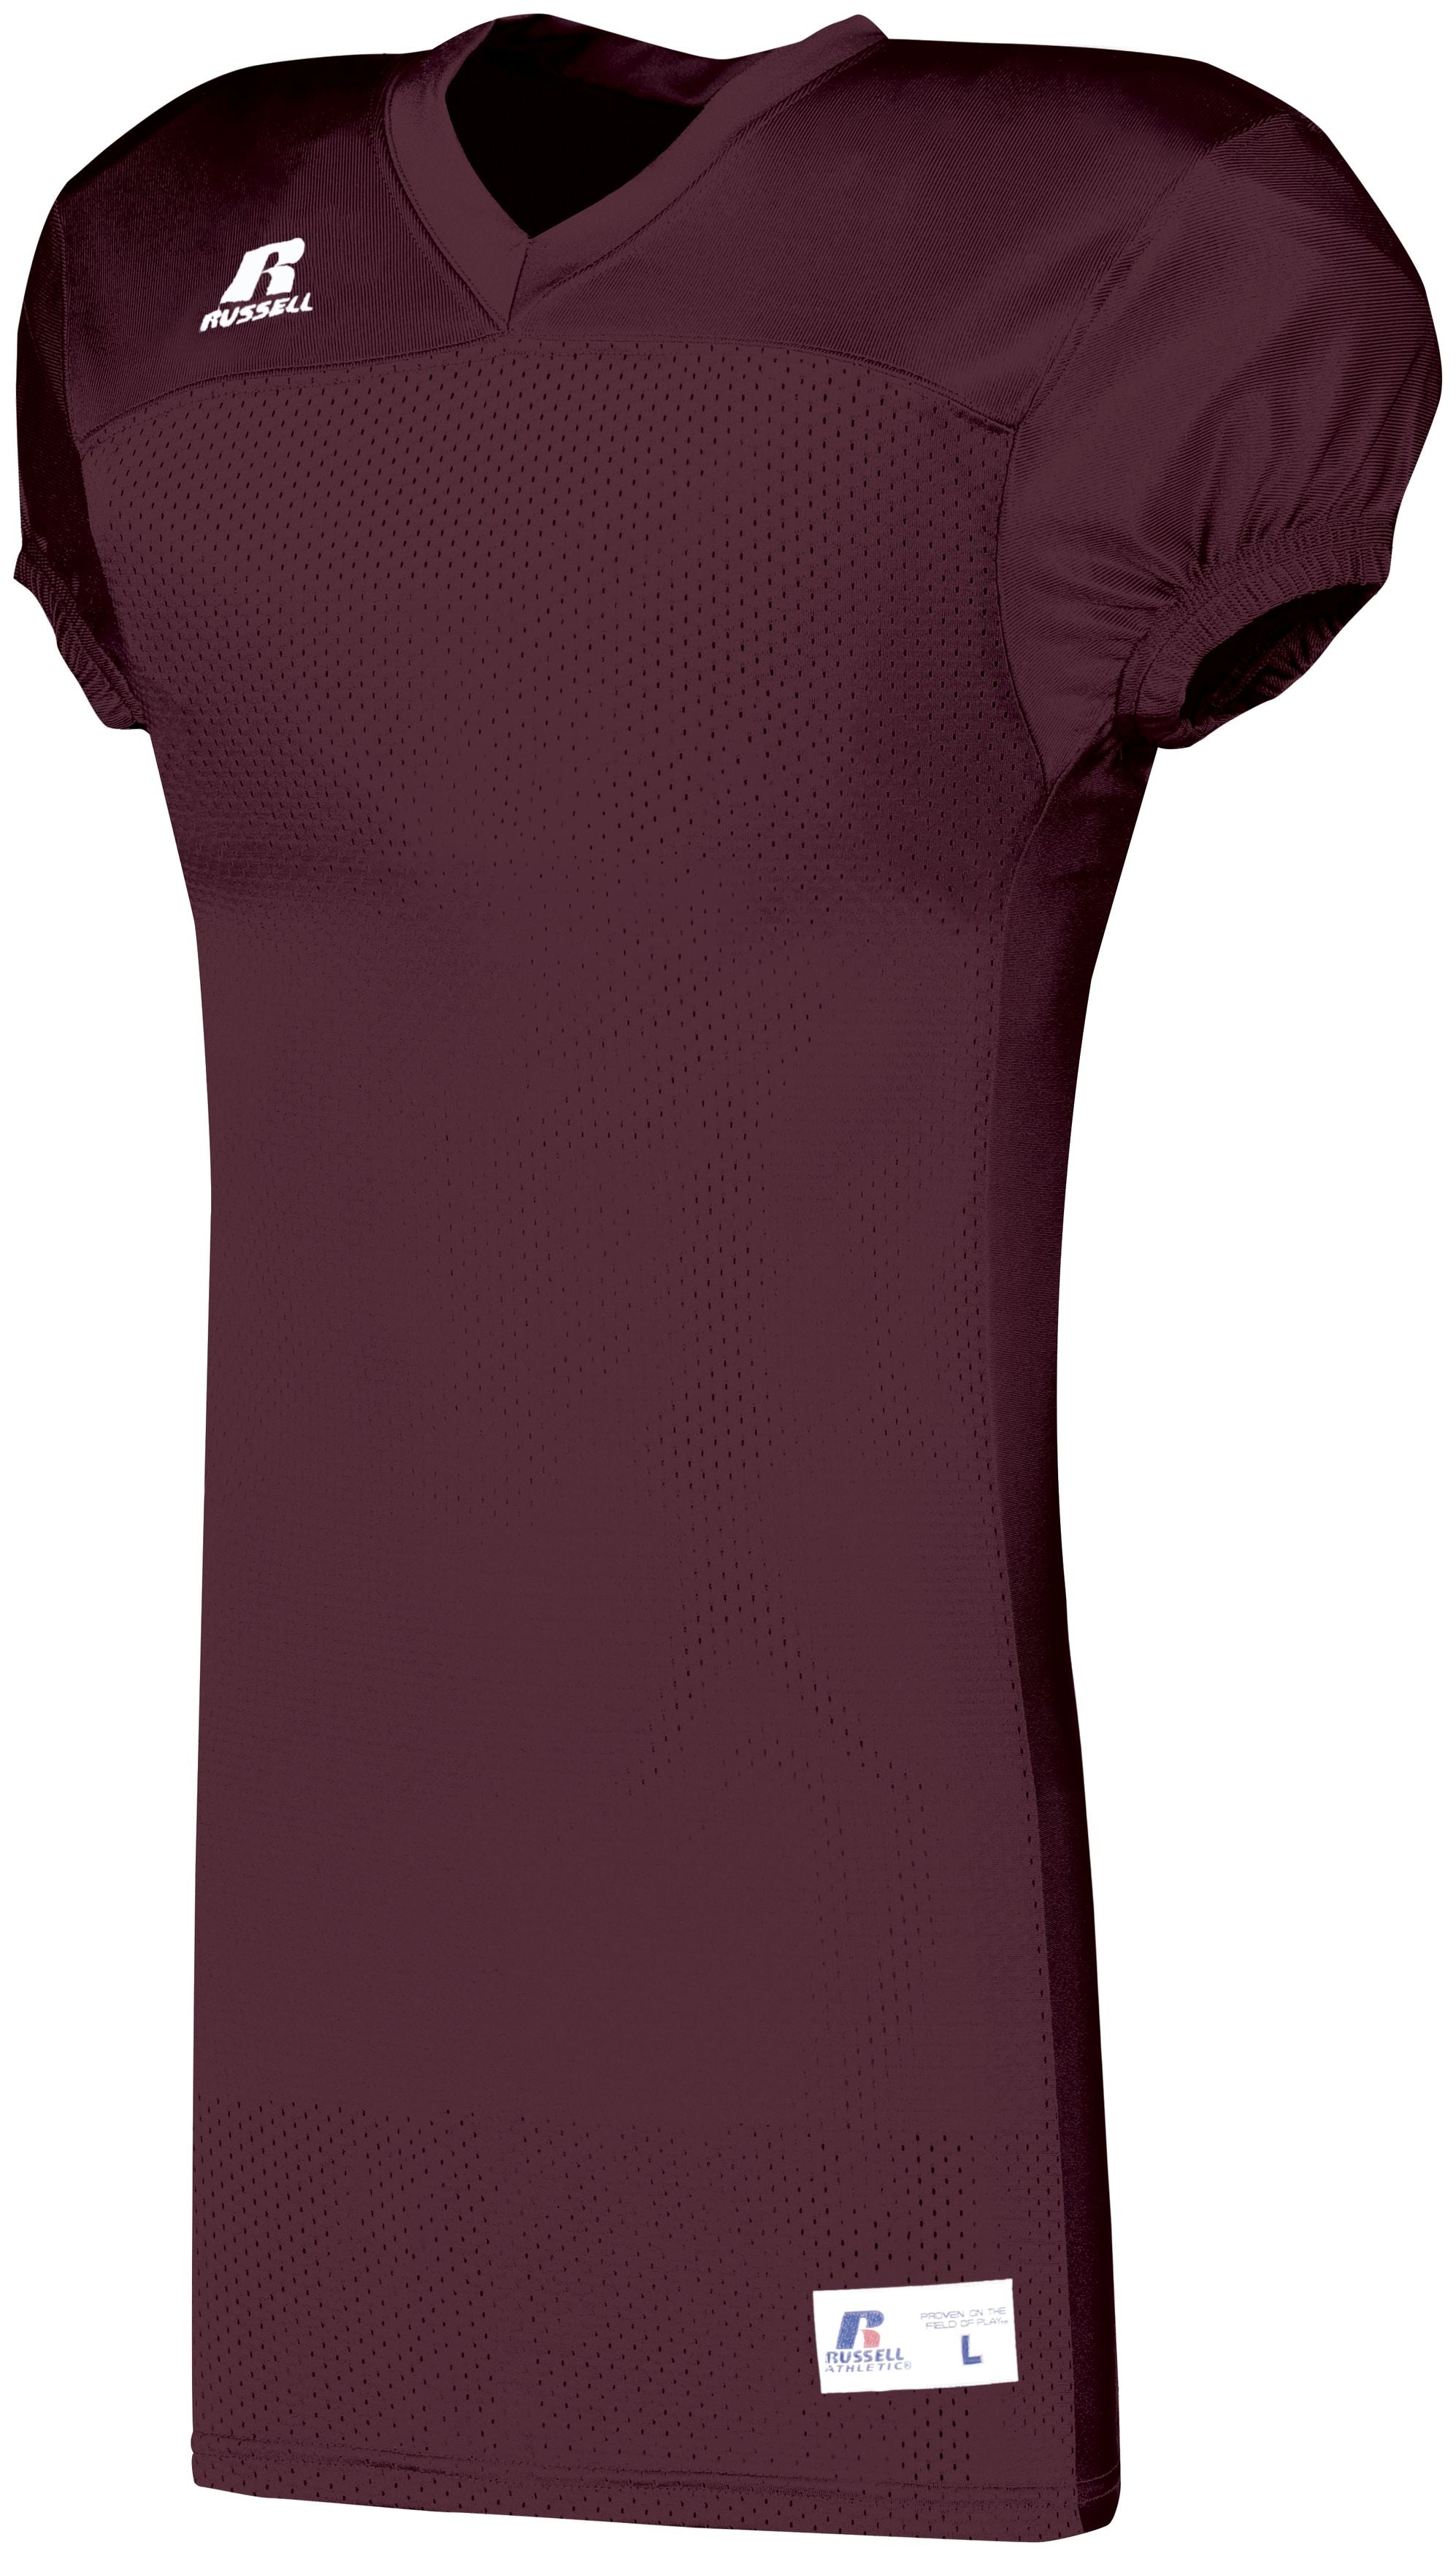 Russell Athletic Youth Solid Jersey With Side Inserts in Maroon  -Part of the Youth, Youth-Jersey, Football, Russell-Athletic-Products, Shirts, All-Sports, All-Sports-1 product lines at KanaleyCreations.com